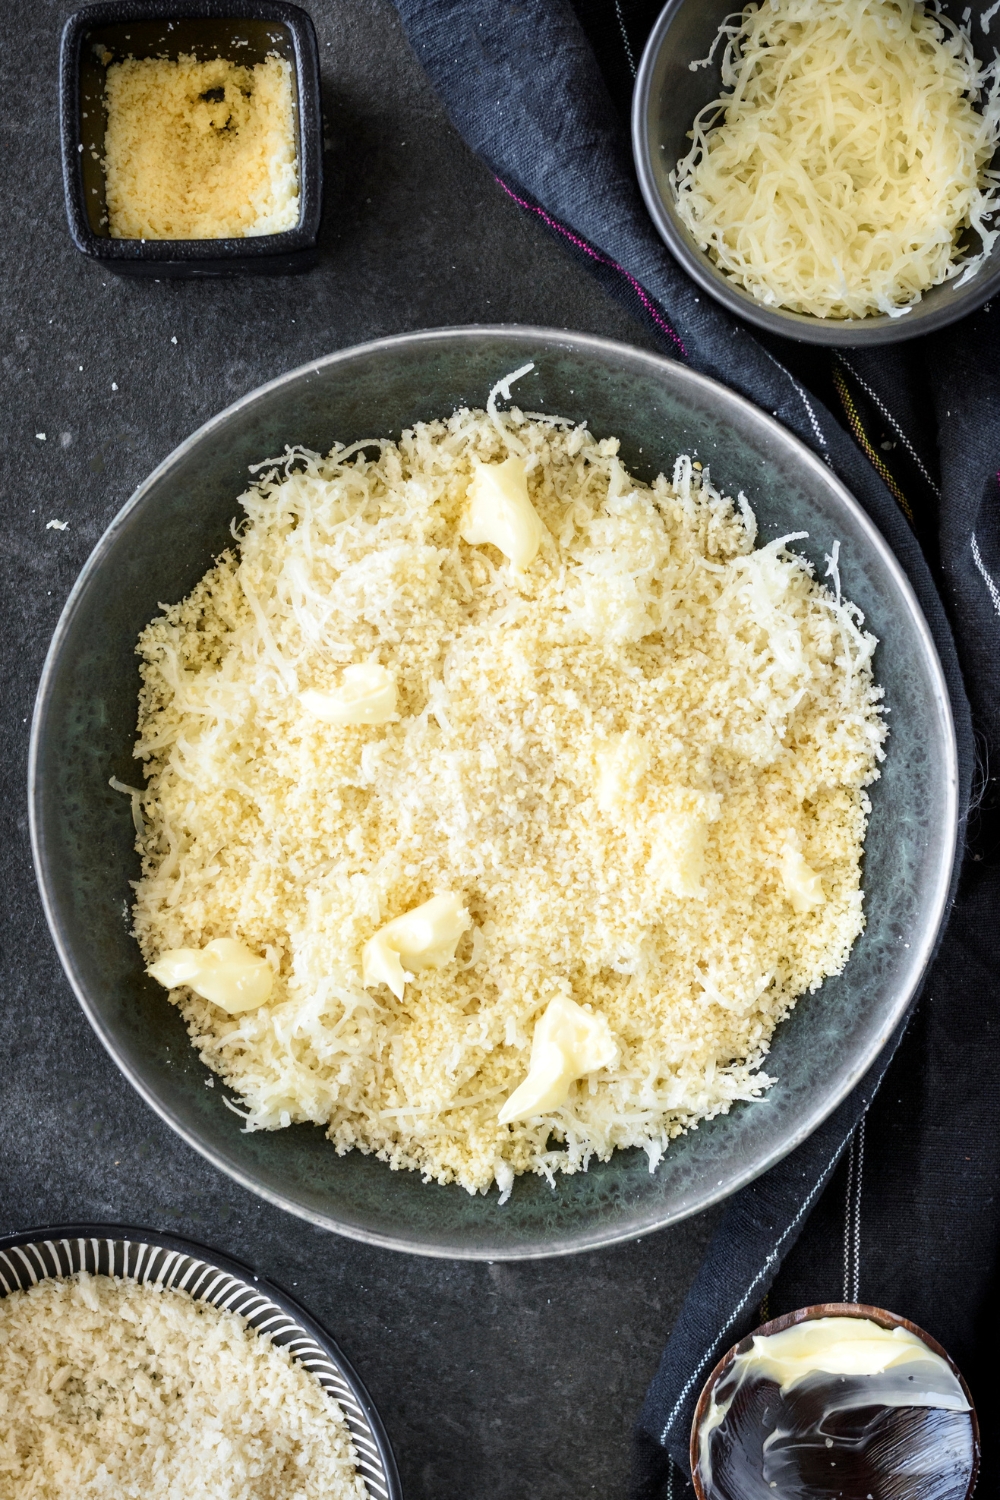 A mixing bowl with the bread crumb and cheese topping.